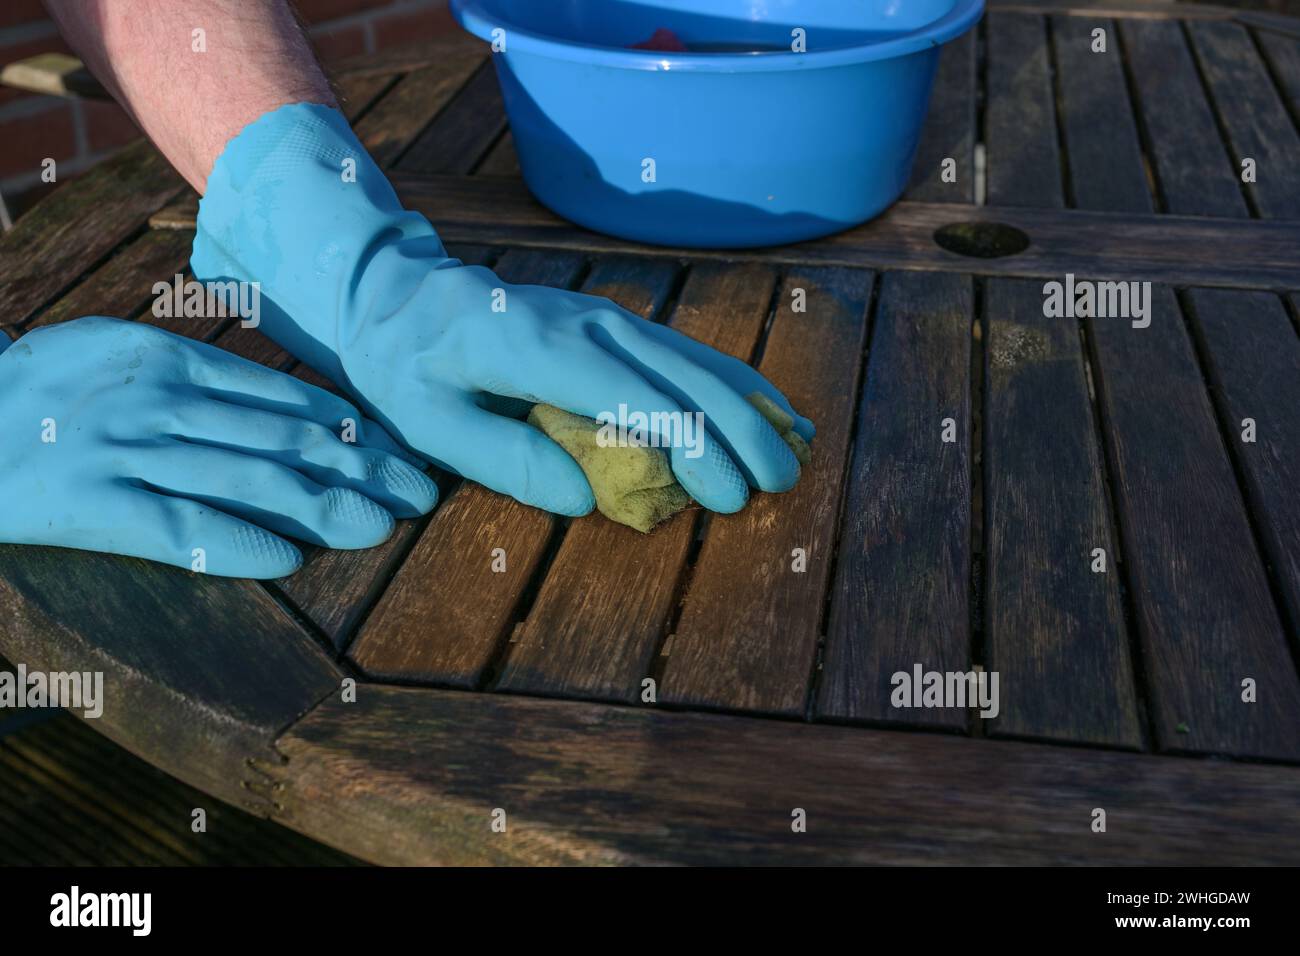 Hands in blue rubber gloves cleaning a weathered wooden garden table at the beginning of spring orthe outdoor season, copy space Stock Photo